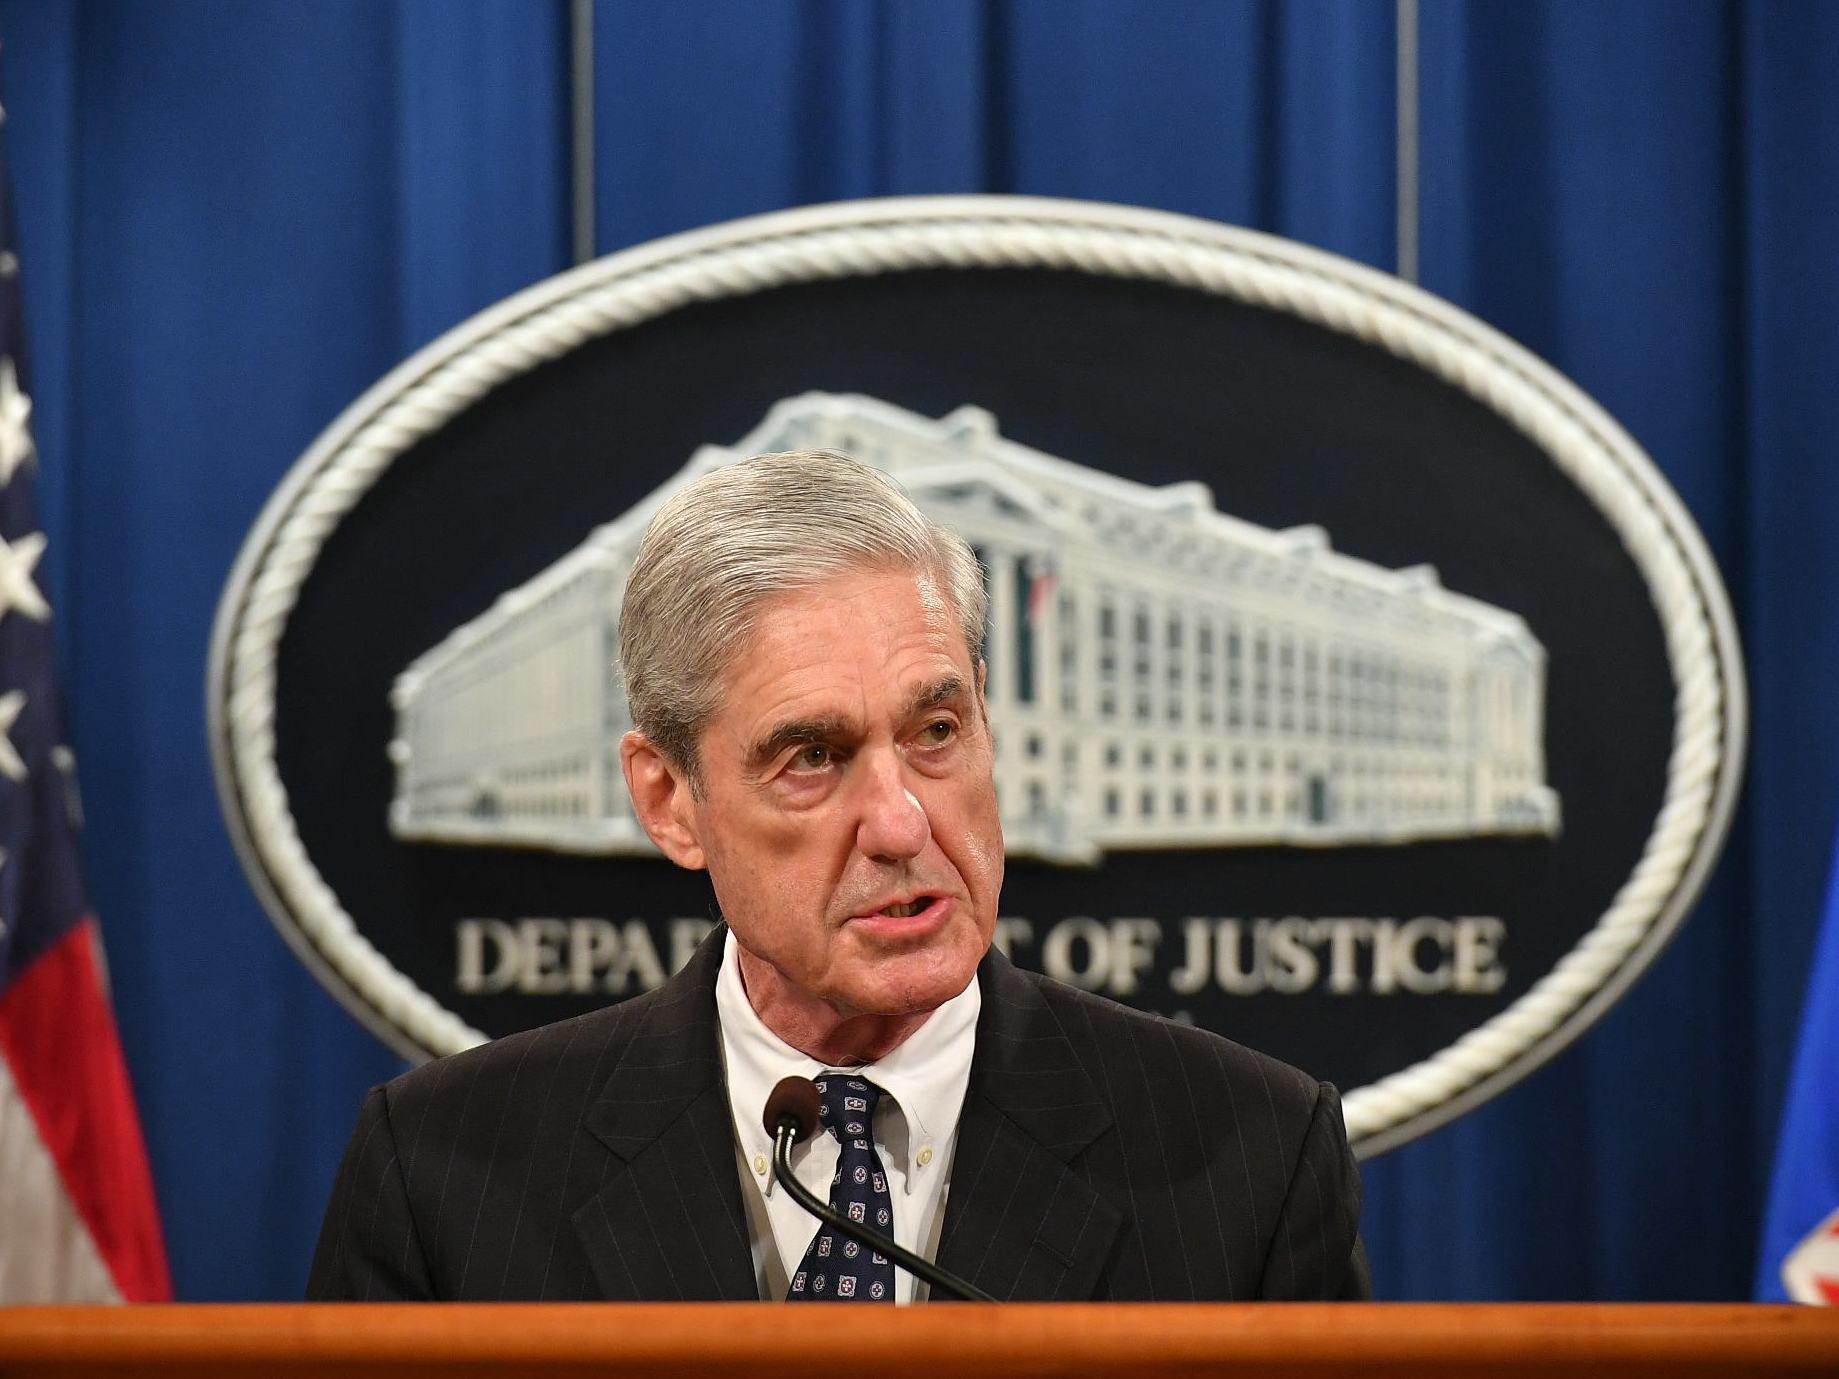 READ Special Counsel Robert Mueller's Full Statement New Hampshire